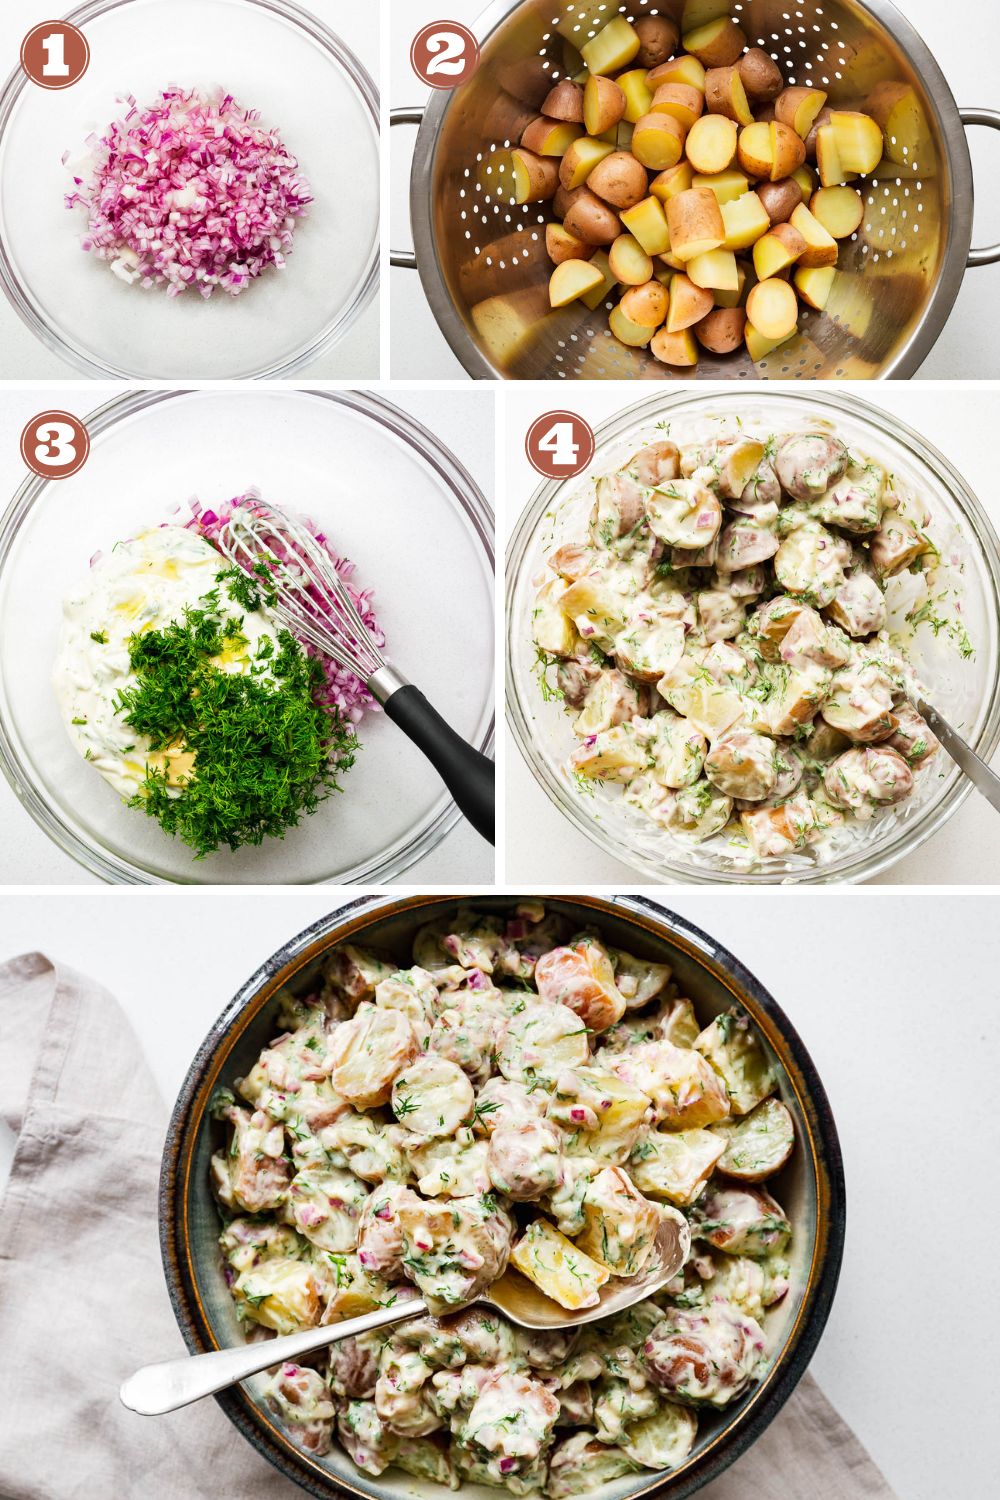 How to make dill red potato salad in four easy steps.